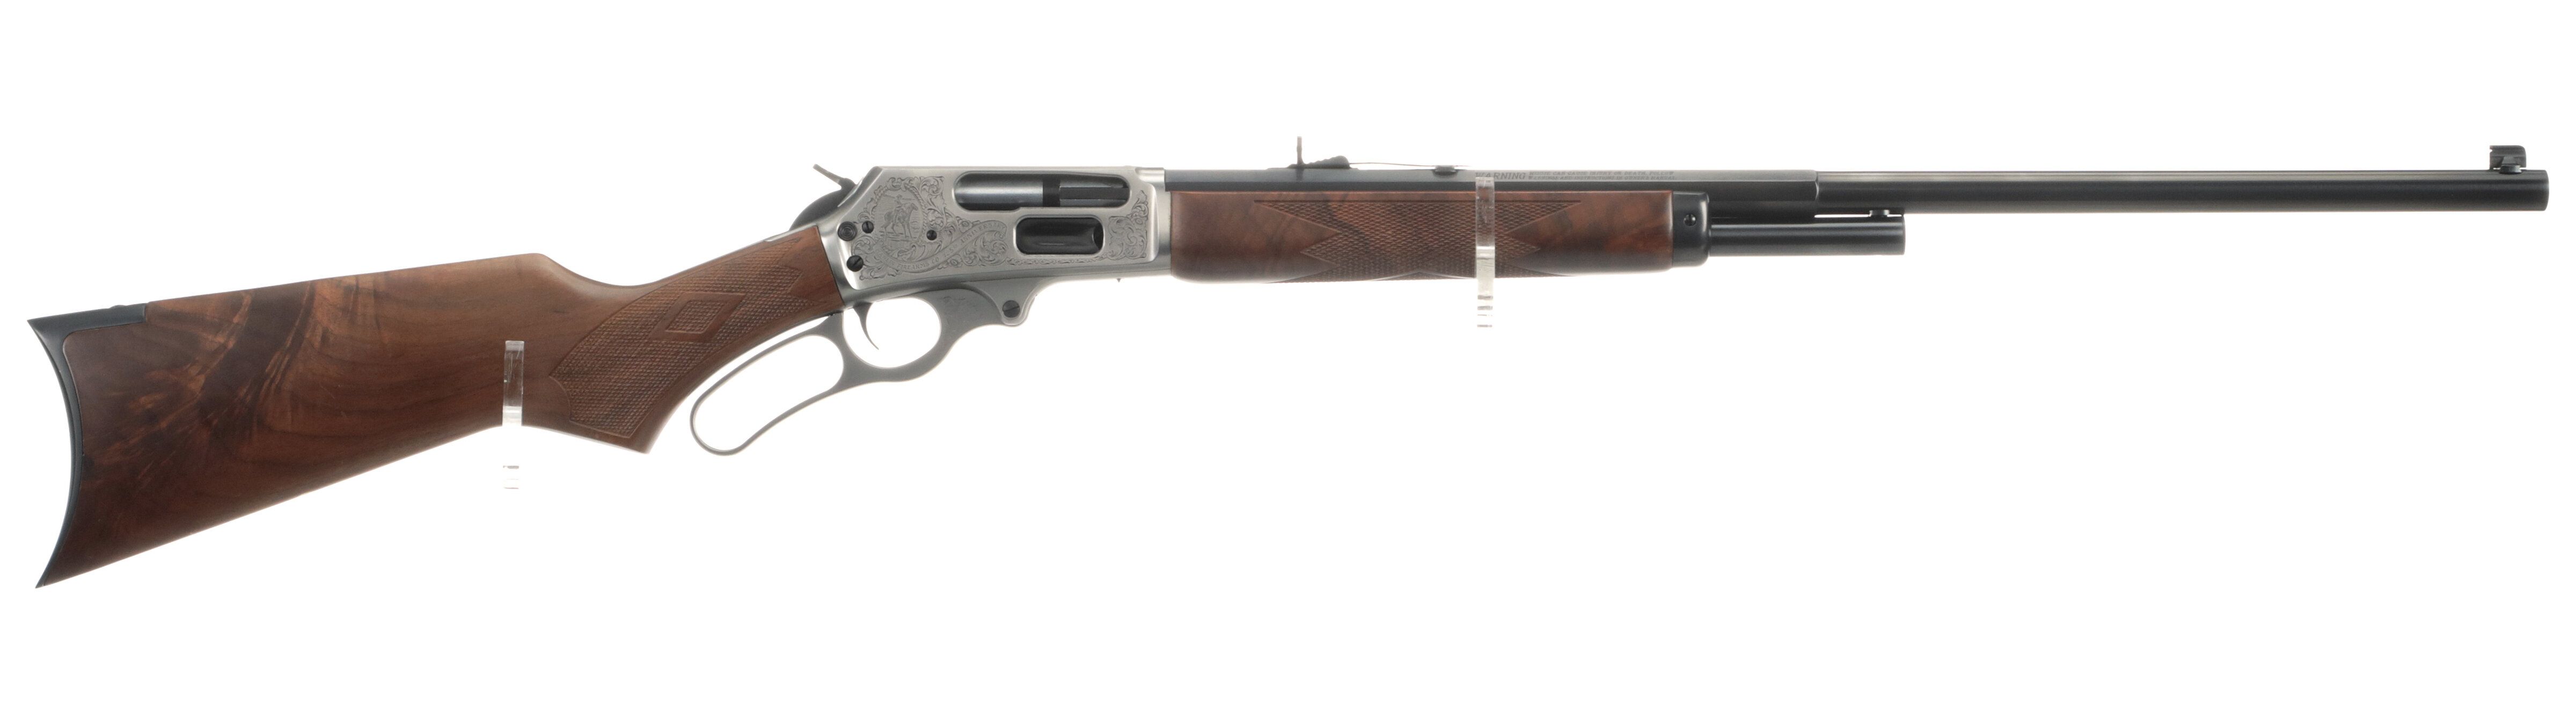 Marlin 1895 Century Limited 100th Anniversary Rifle with Box 